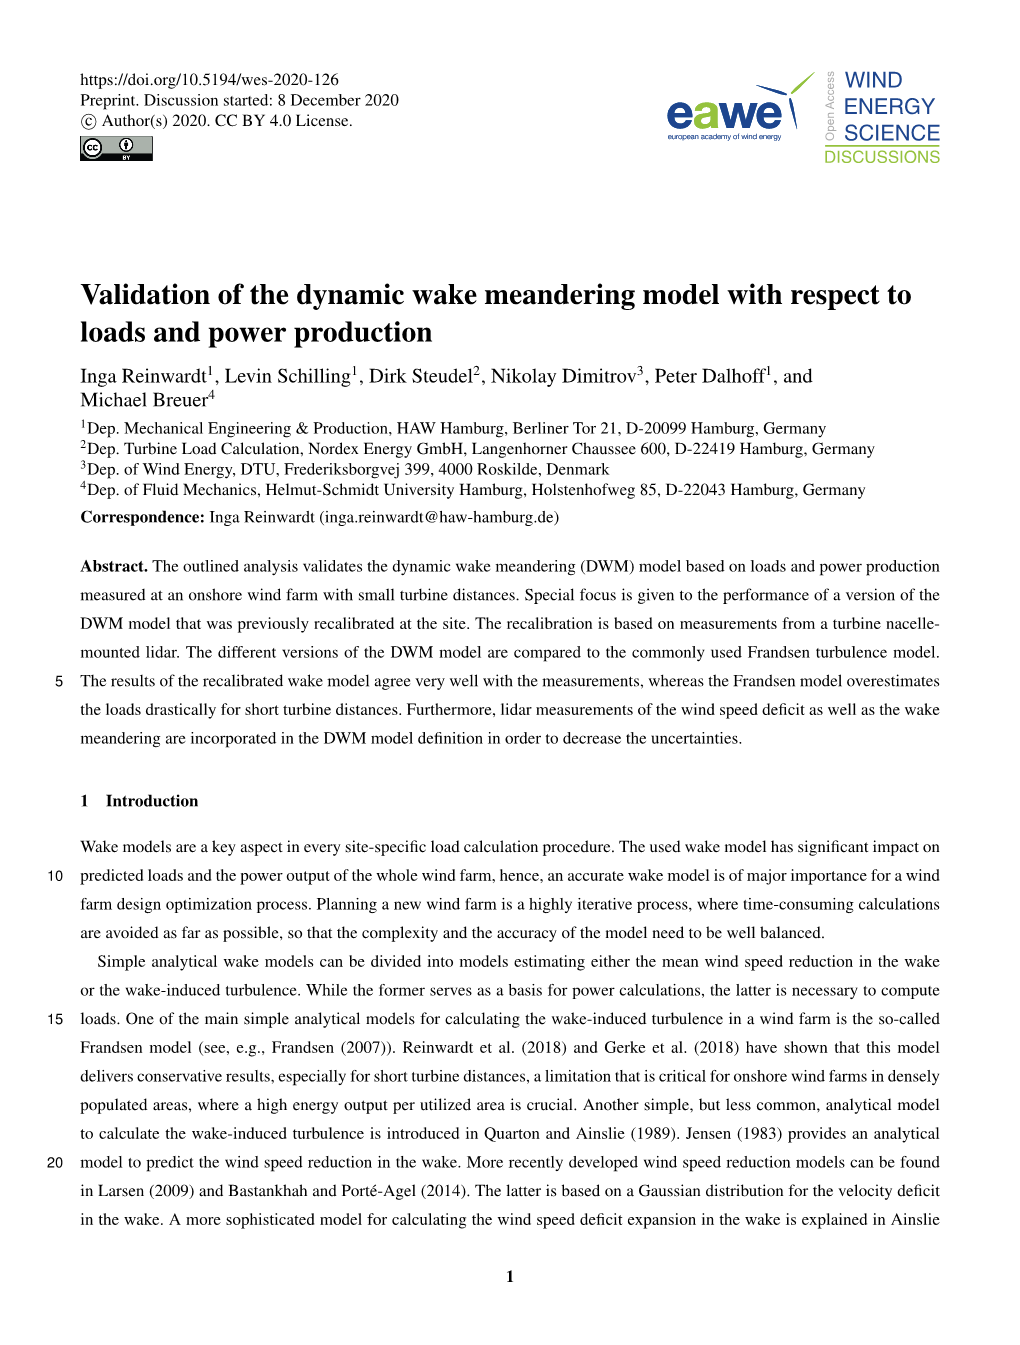 Validation of the Dynamic Wake Meandering Model with Respect To